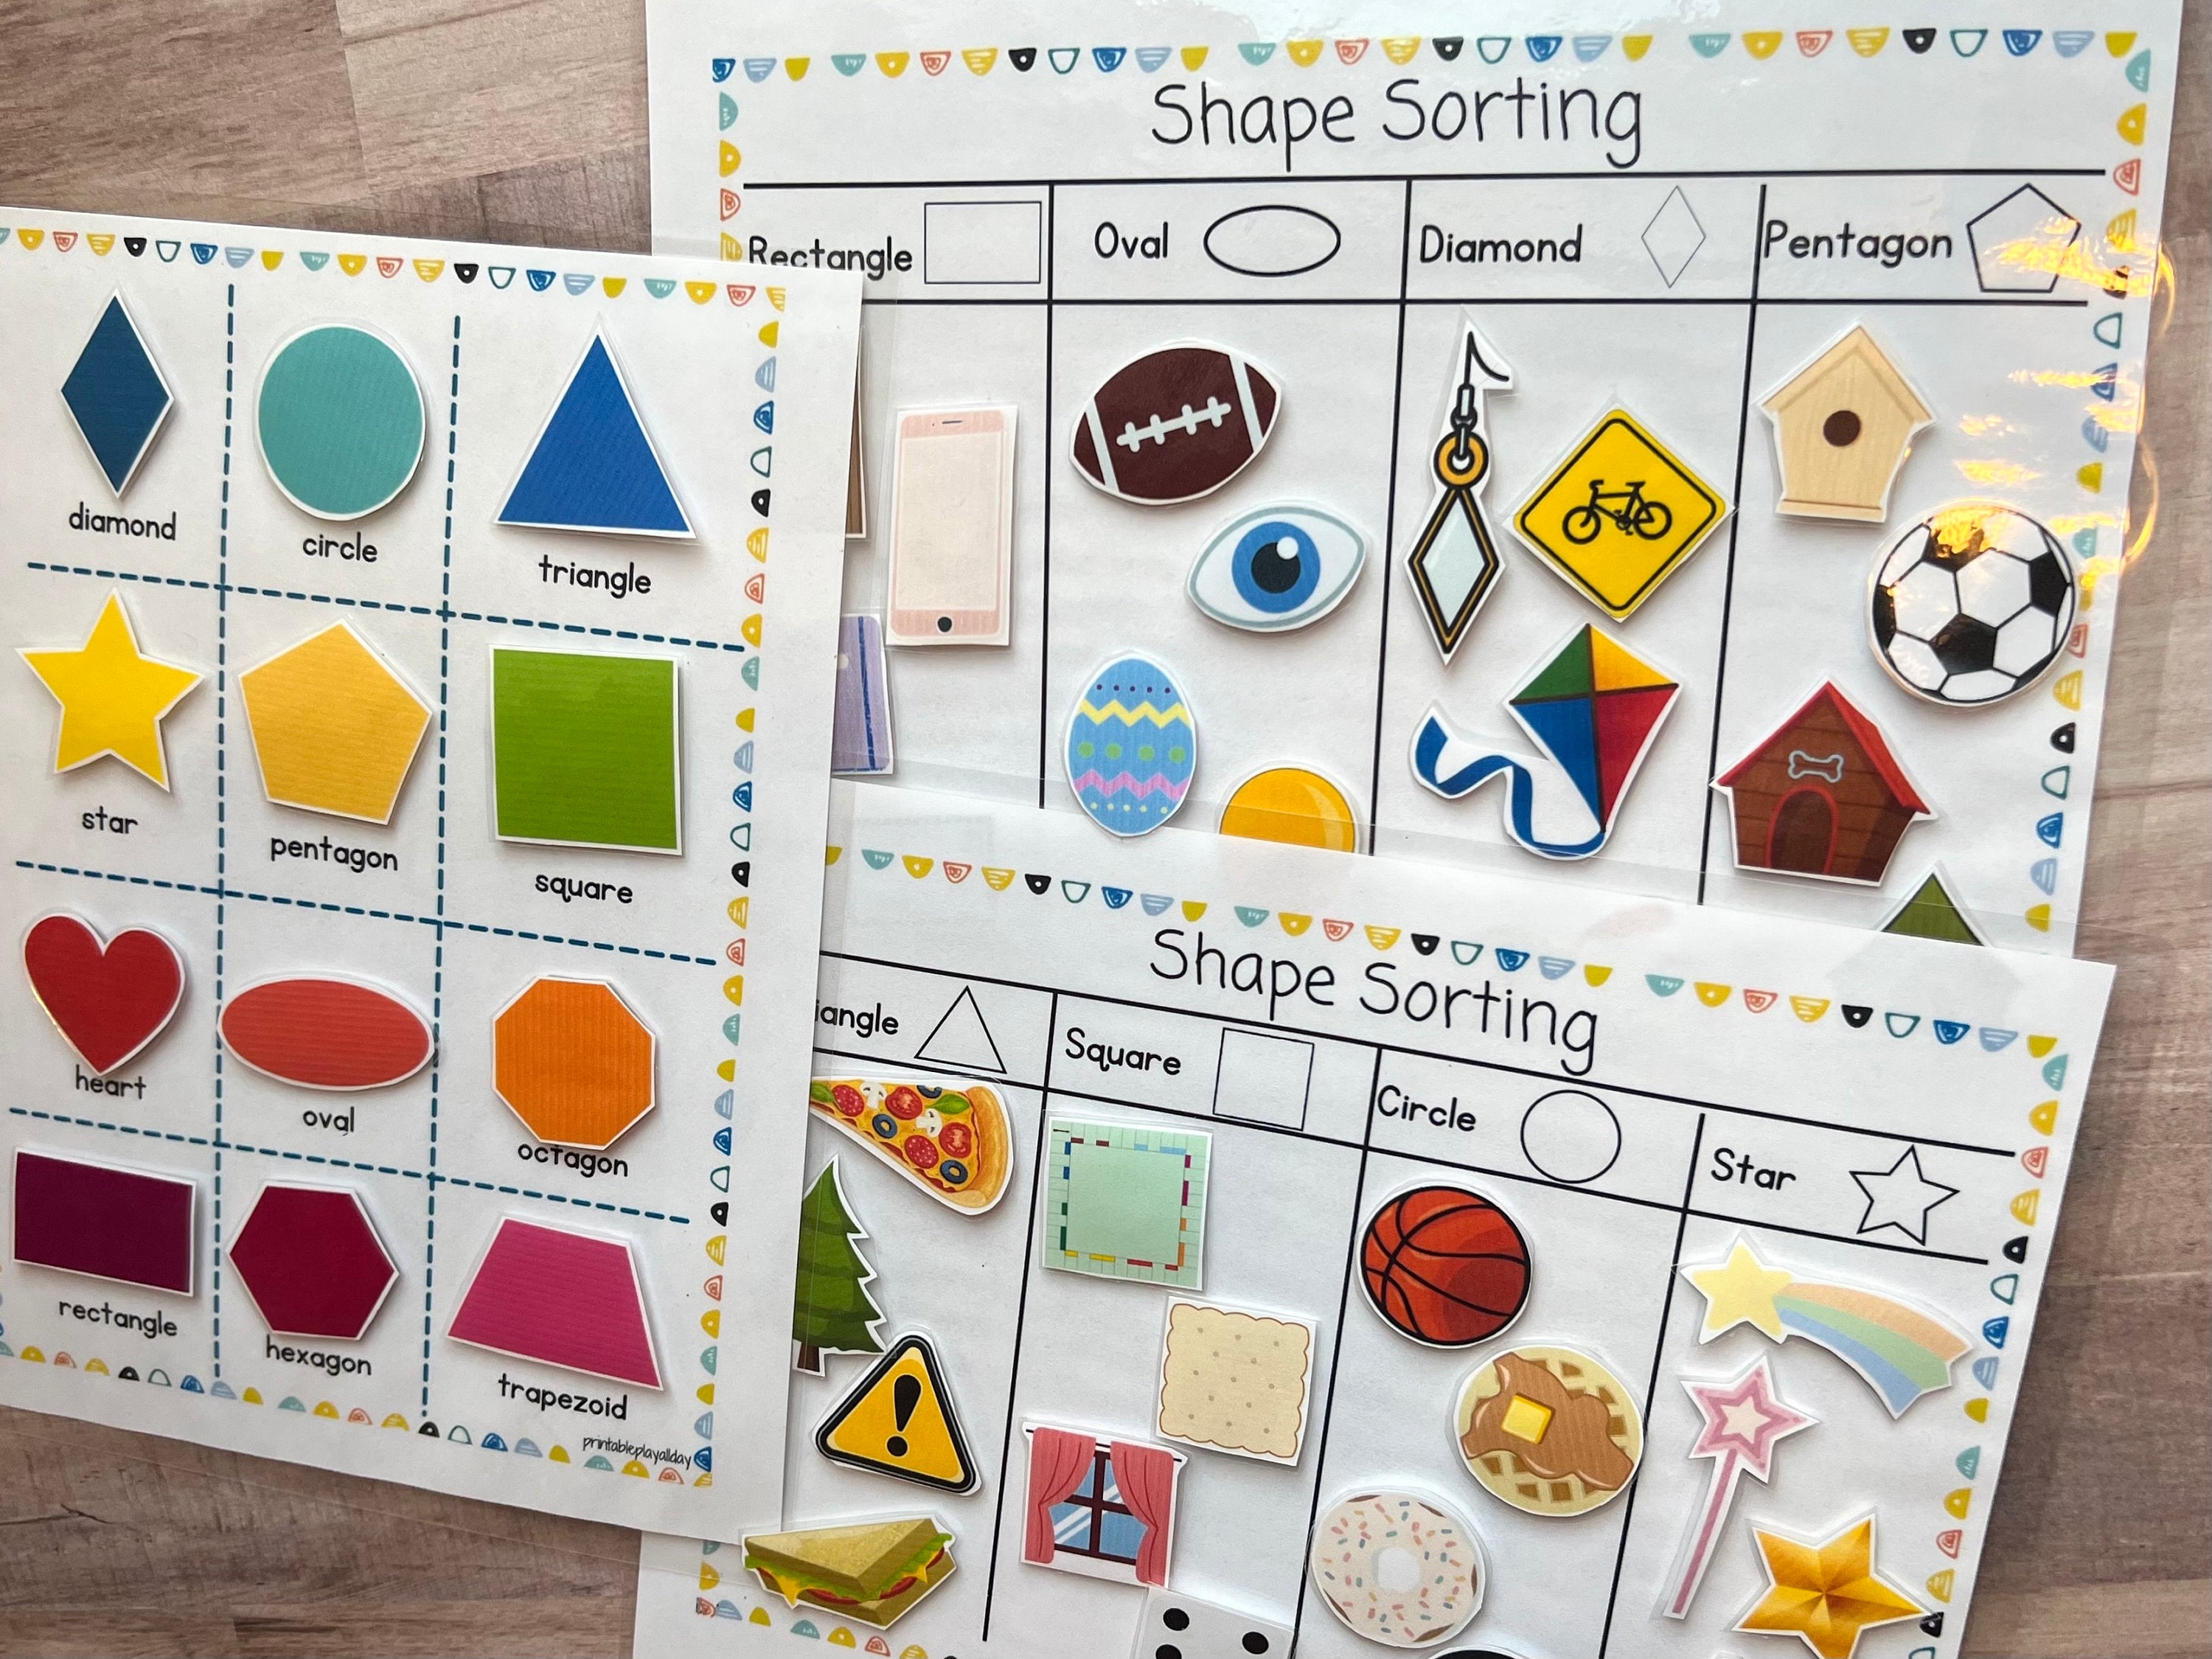 Shapes Matching game, Shape Matching Activity for Toddlers, Learning Shapes  Toddler Busy Book pintable Homeschool toddler printable activity